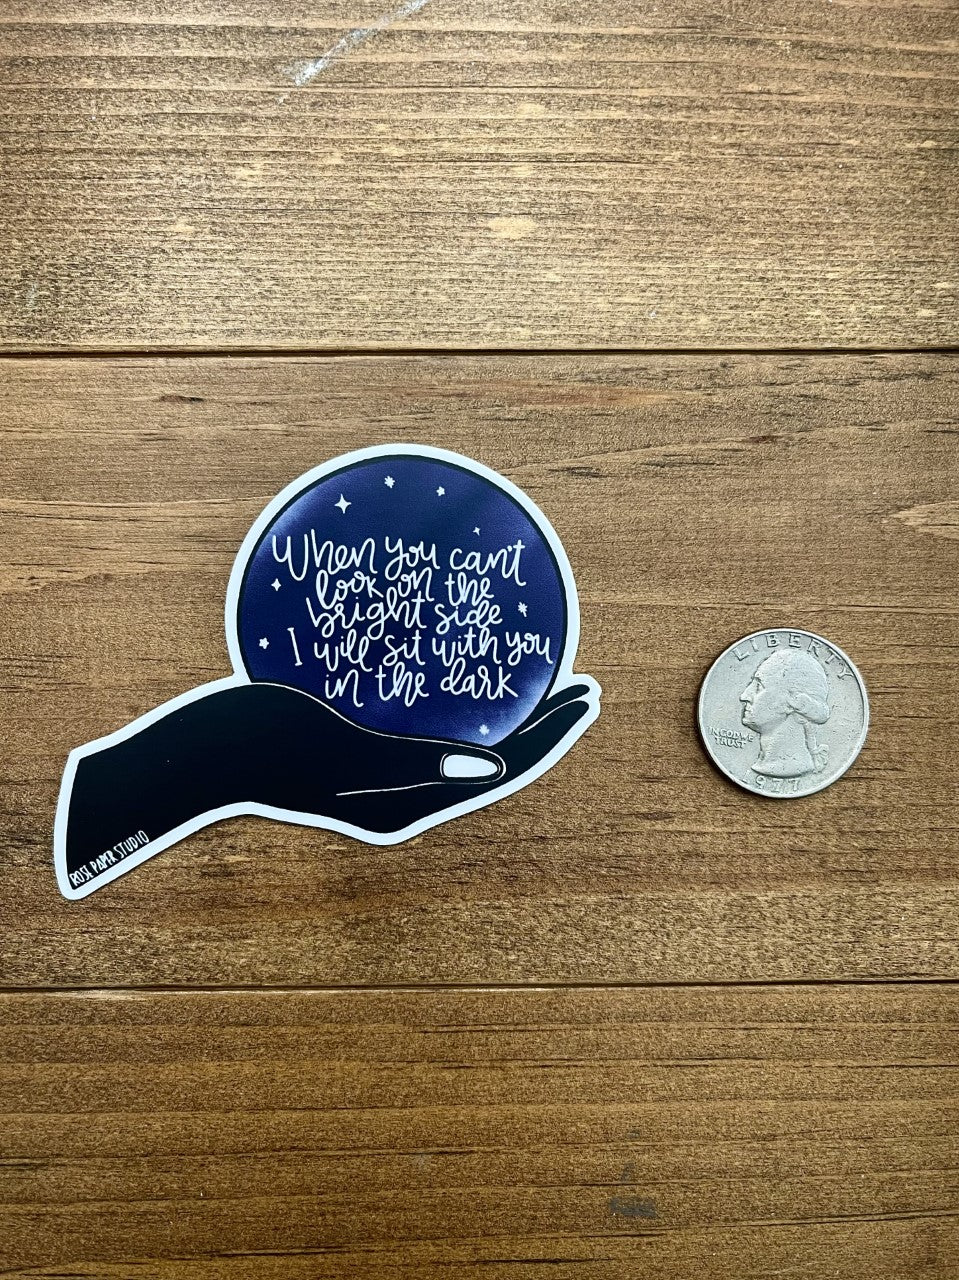 When You Can't Look on the Bright Side, I Will Sit With You in the Dark | Weatherproof Die Cut Sticker